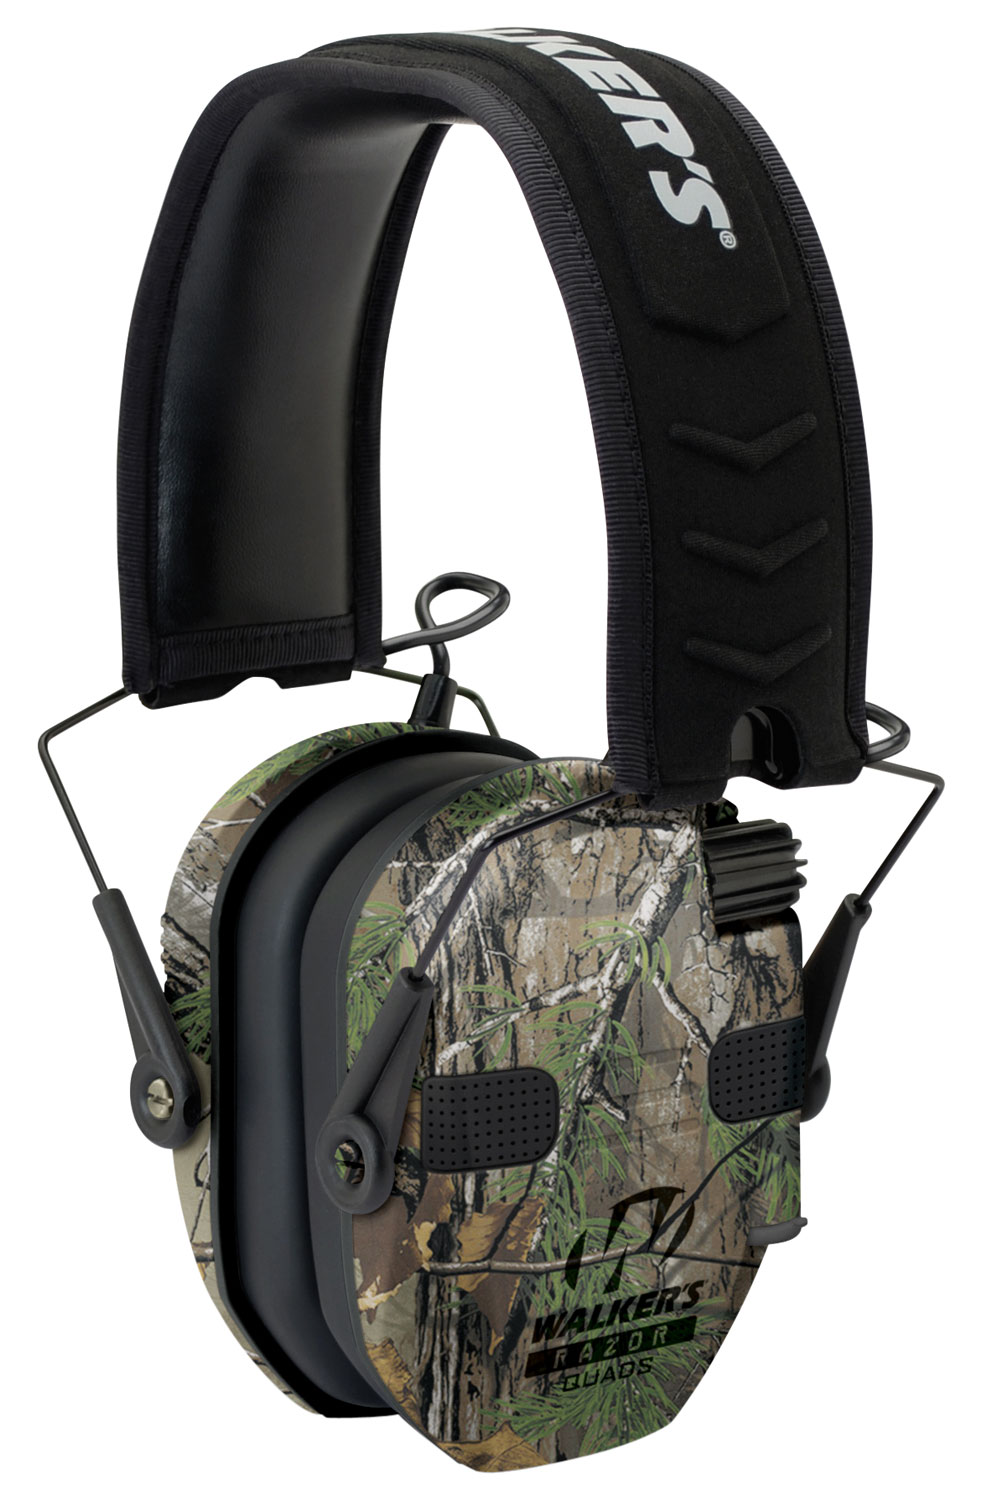 Walkers GWPRSEQMCMO Razor Slim Electronic Muff with Quad Microphones Polymer 23 dB Over the Head Realtree Xtra Ear Cups with Black Headband & White Logo Adult